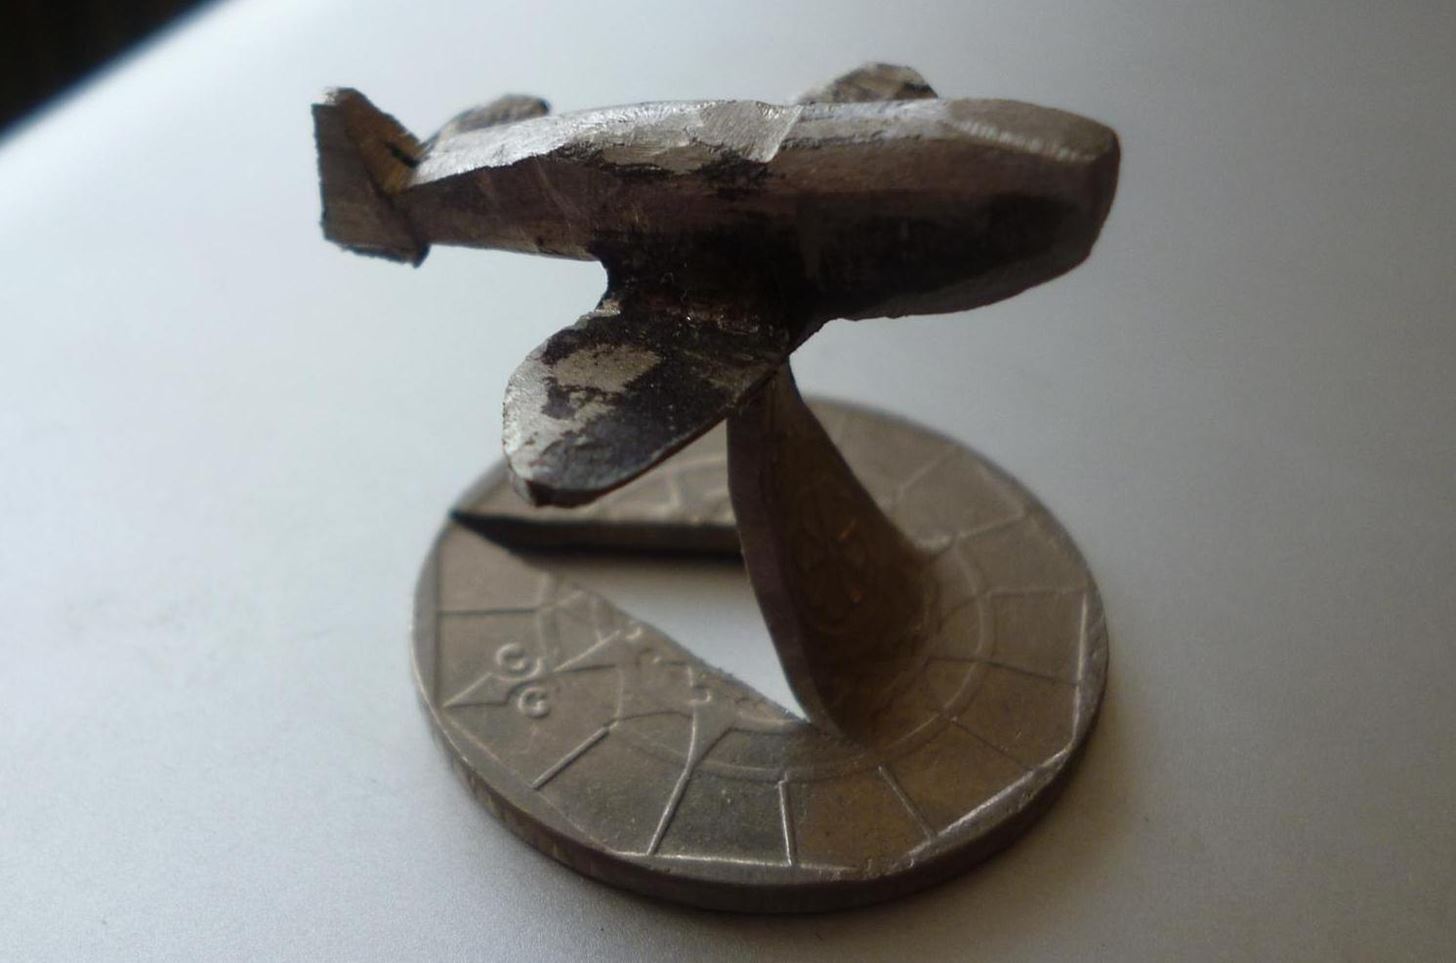 How to Sculpt Your Spare Change into a Badass Miniature Jet Fighter Plane